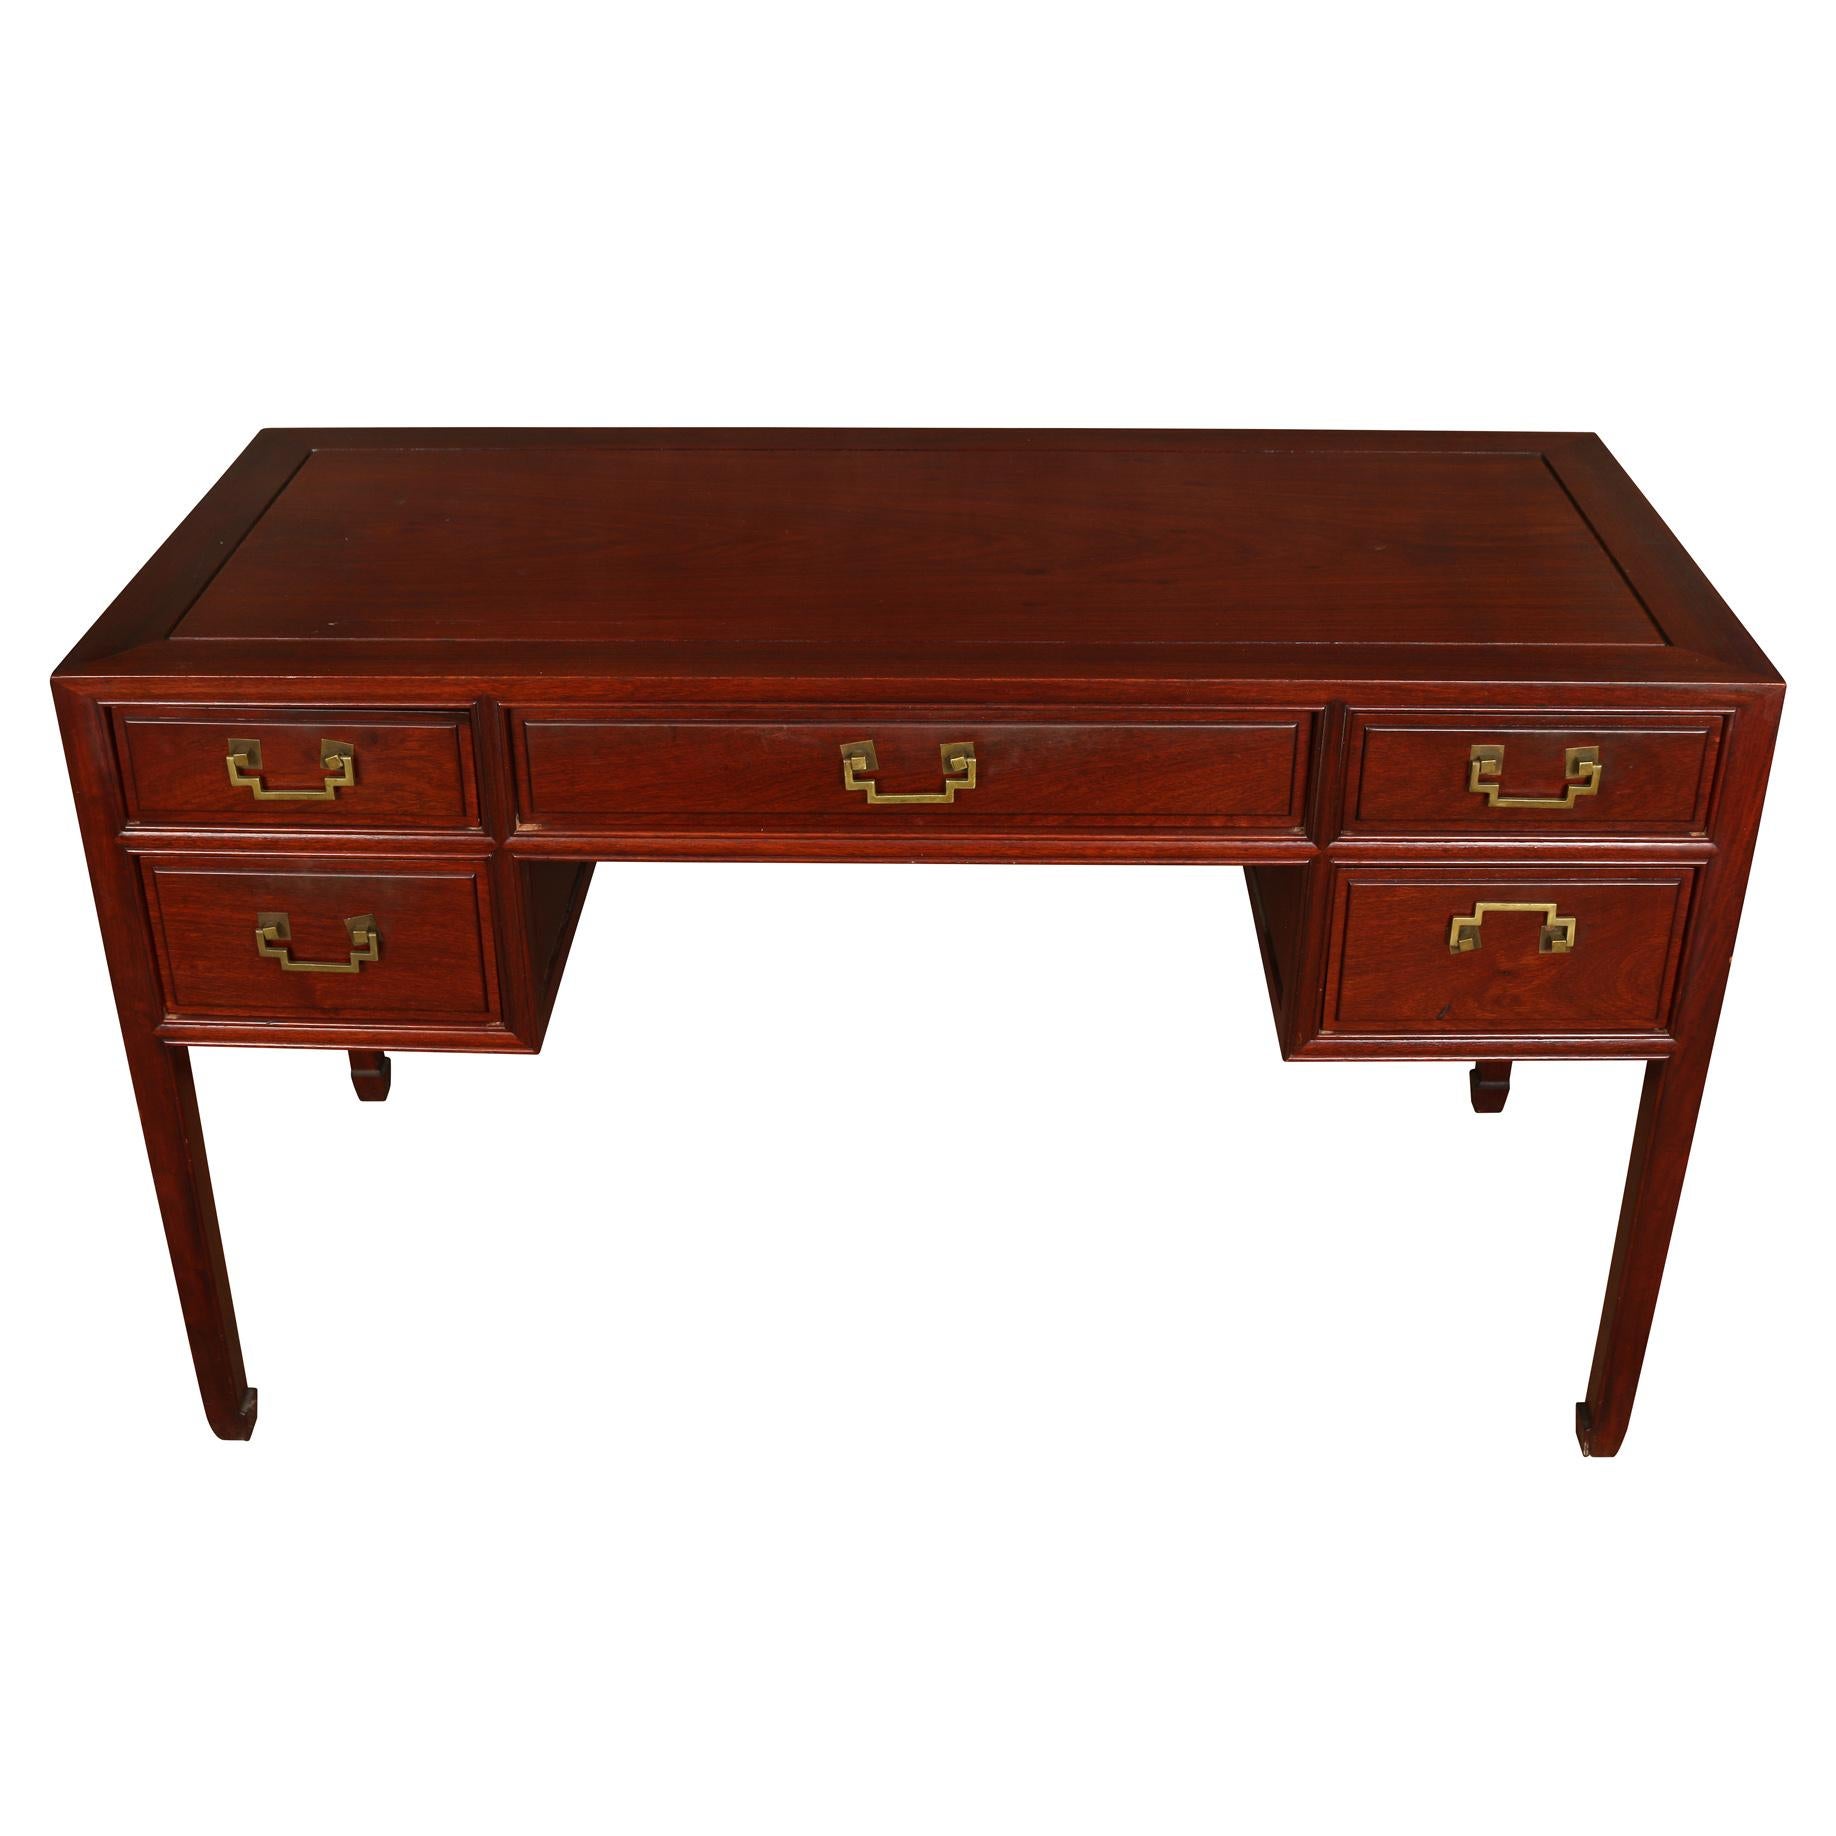 Asian Cherry Wood Five Drawer Desk with Brass Hardware